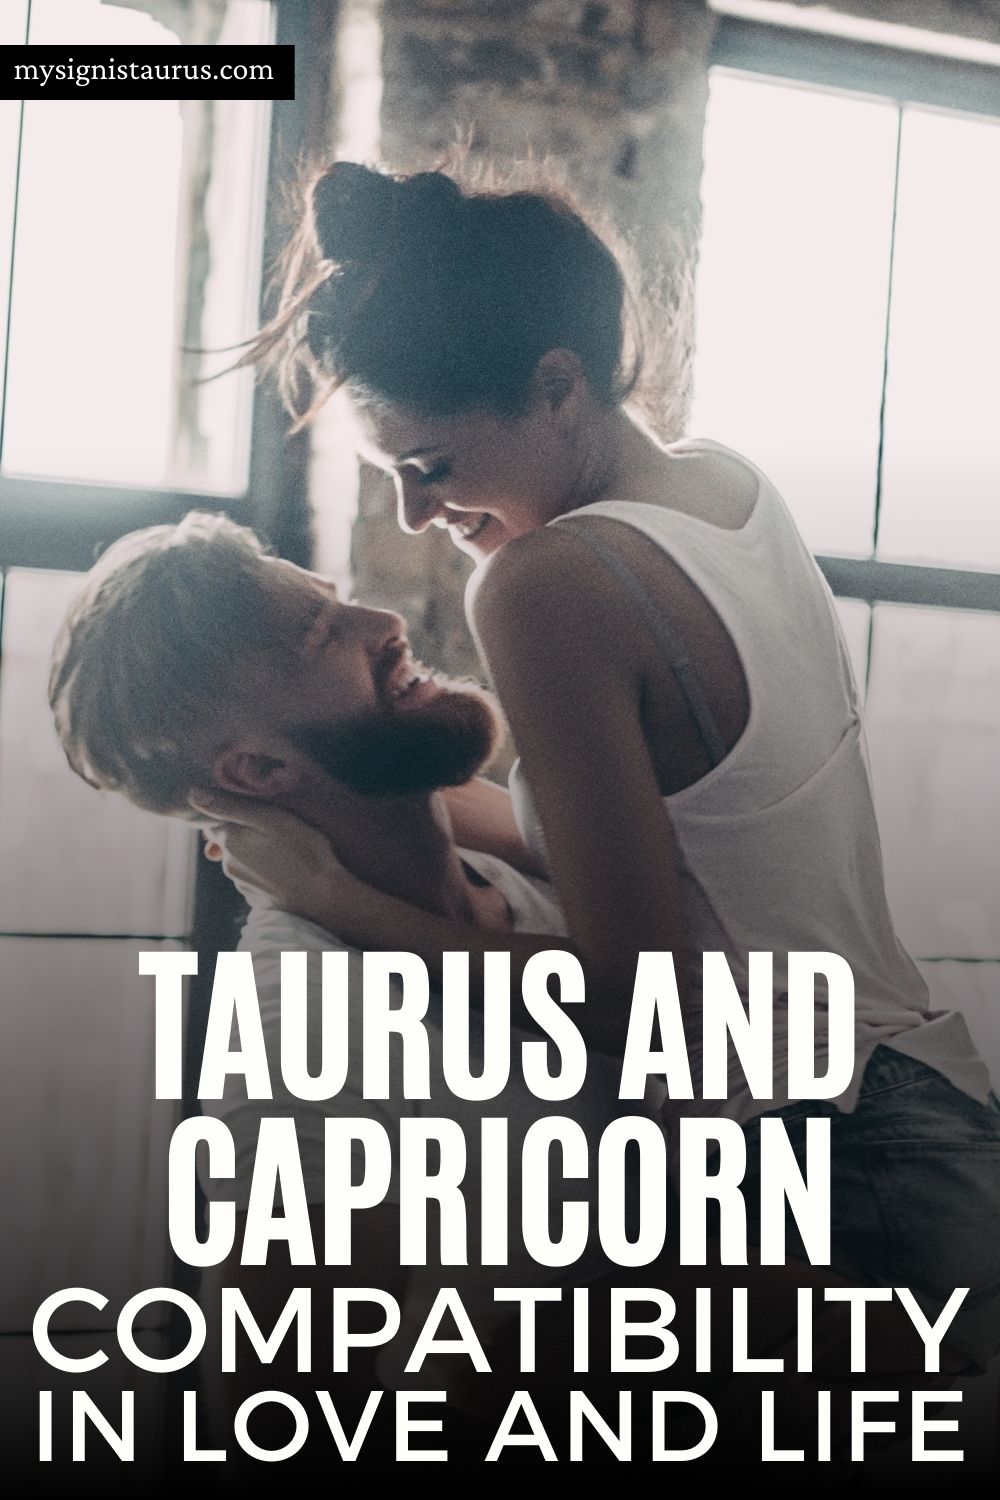 Taurus And Capricorn Compatibility In Love And Life #taurus #capricorn #tauruslove #astrology #dating